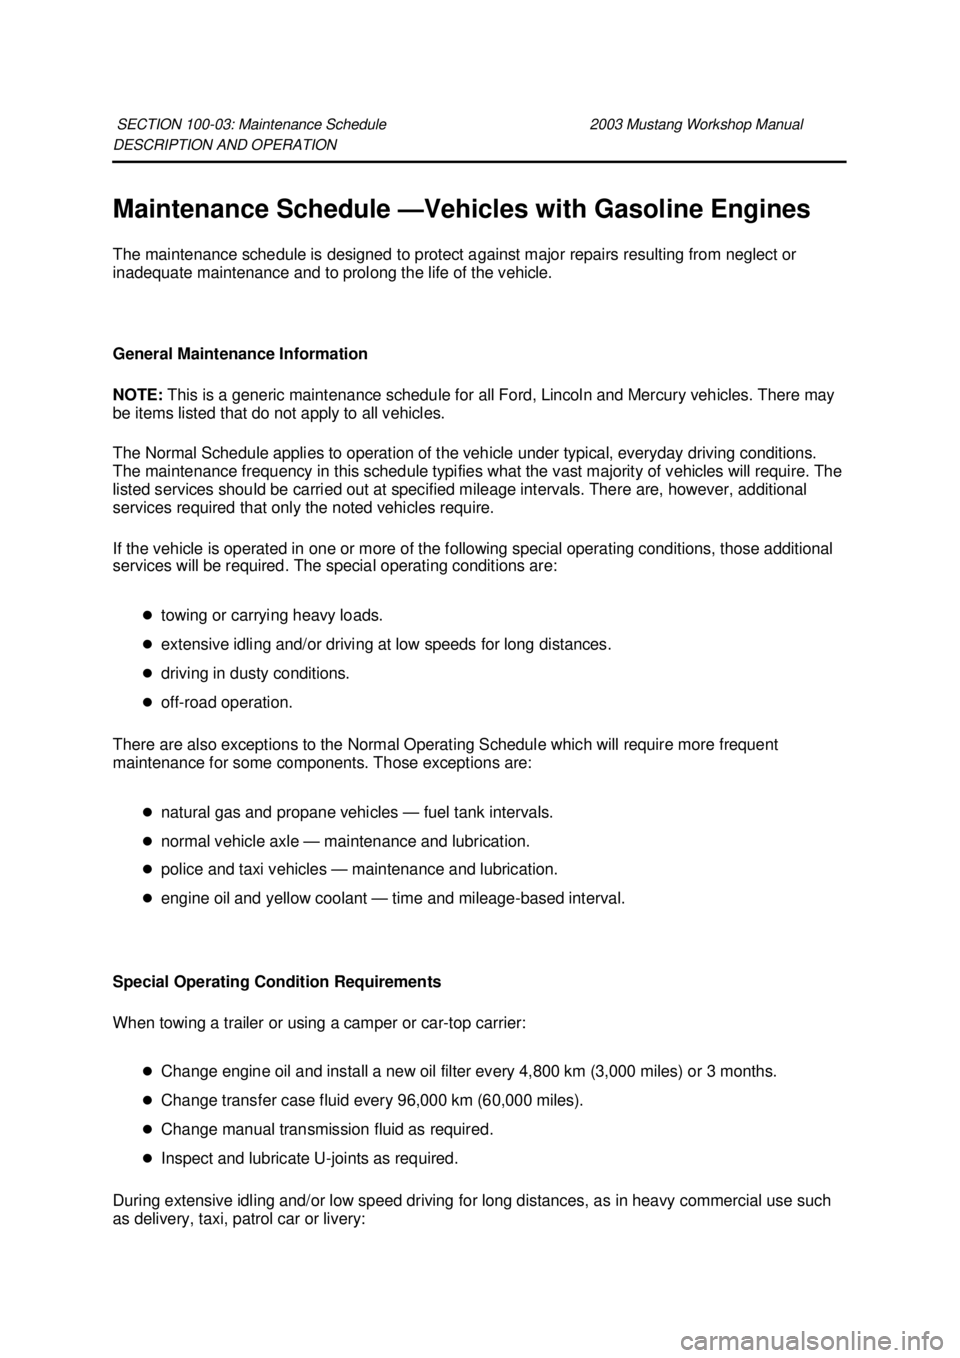 FORD MUSTANG 2003  Workshop Manual DESCRIPTION AND OPERATION 
Maintenance Schedule —
Vehicles with Gasoline Engines 
The maintenance schedule is designed to protect against major repairs resulting from neglect or 
inadequate maintena